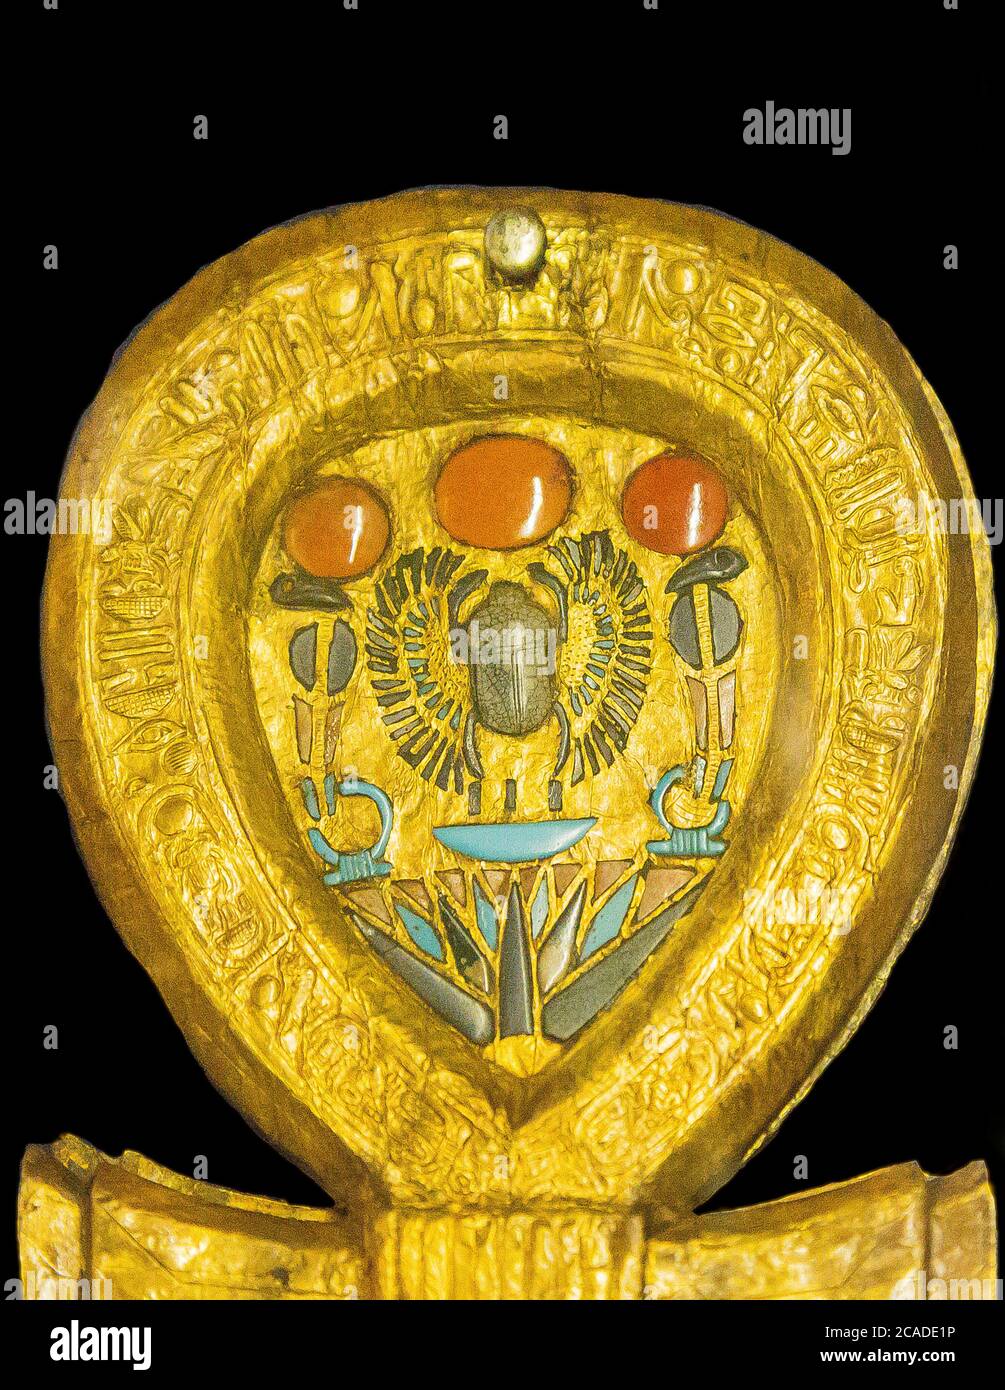 Egypt, Cairo, Egyptian Museum, Tutankhamon jewellery : Mirror case in the shape of an Ankh sign. Inside the loop, a winged scarab. Stock Photo